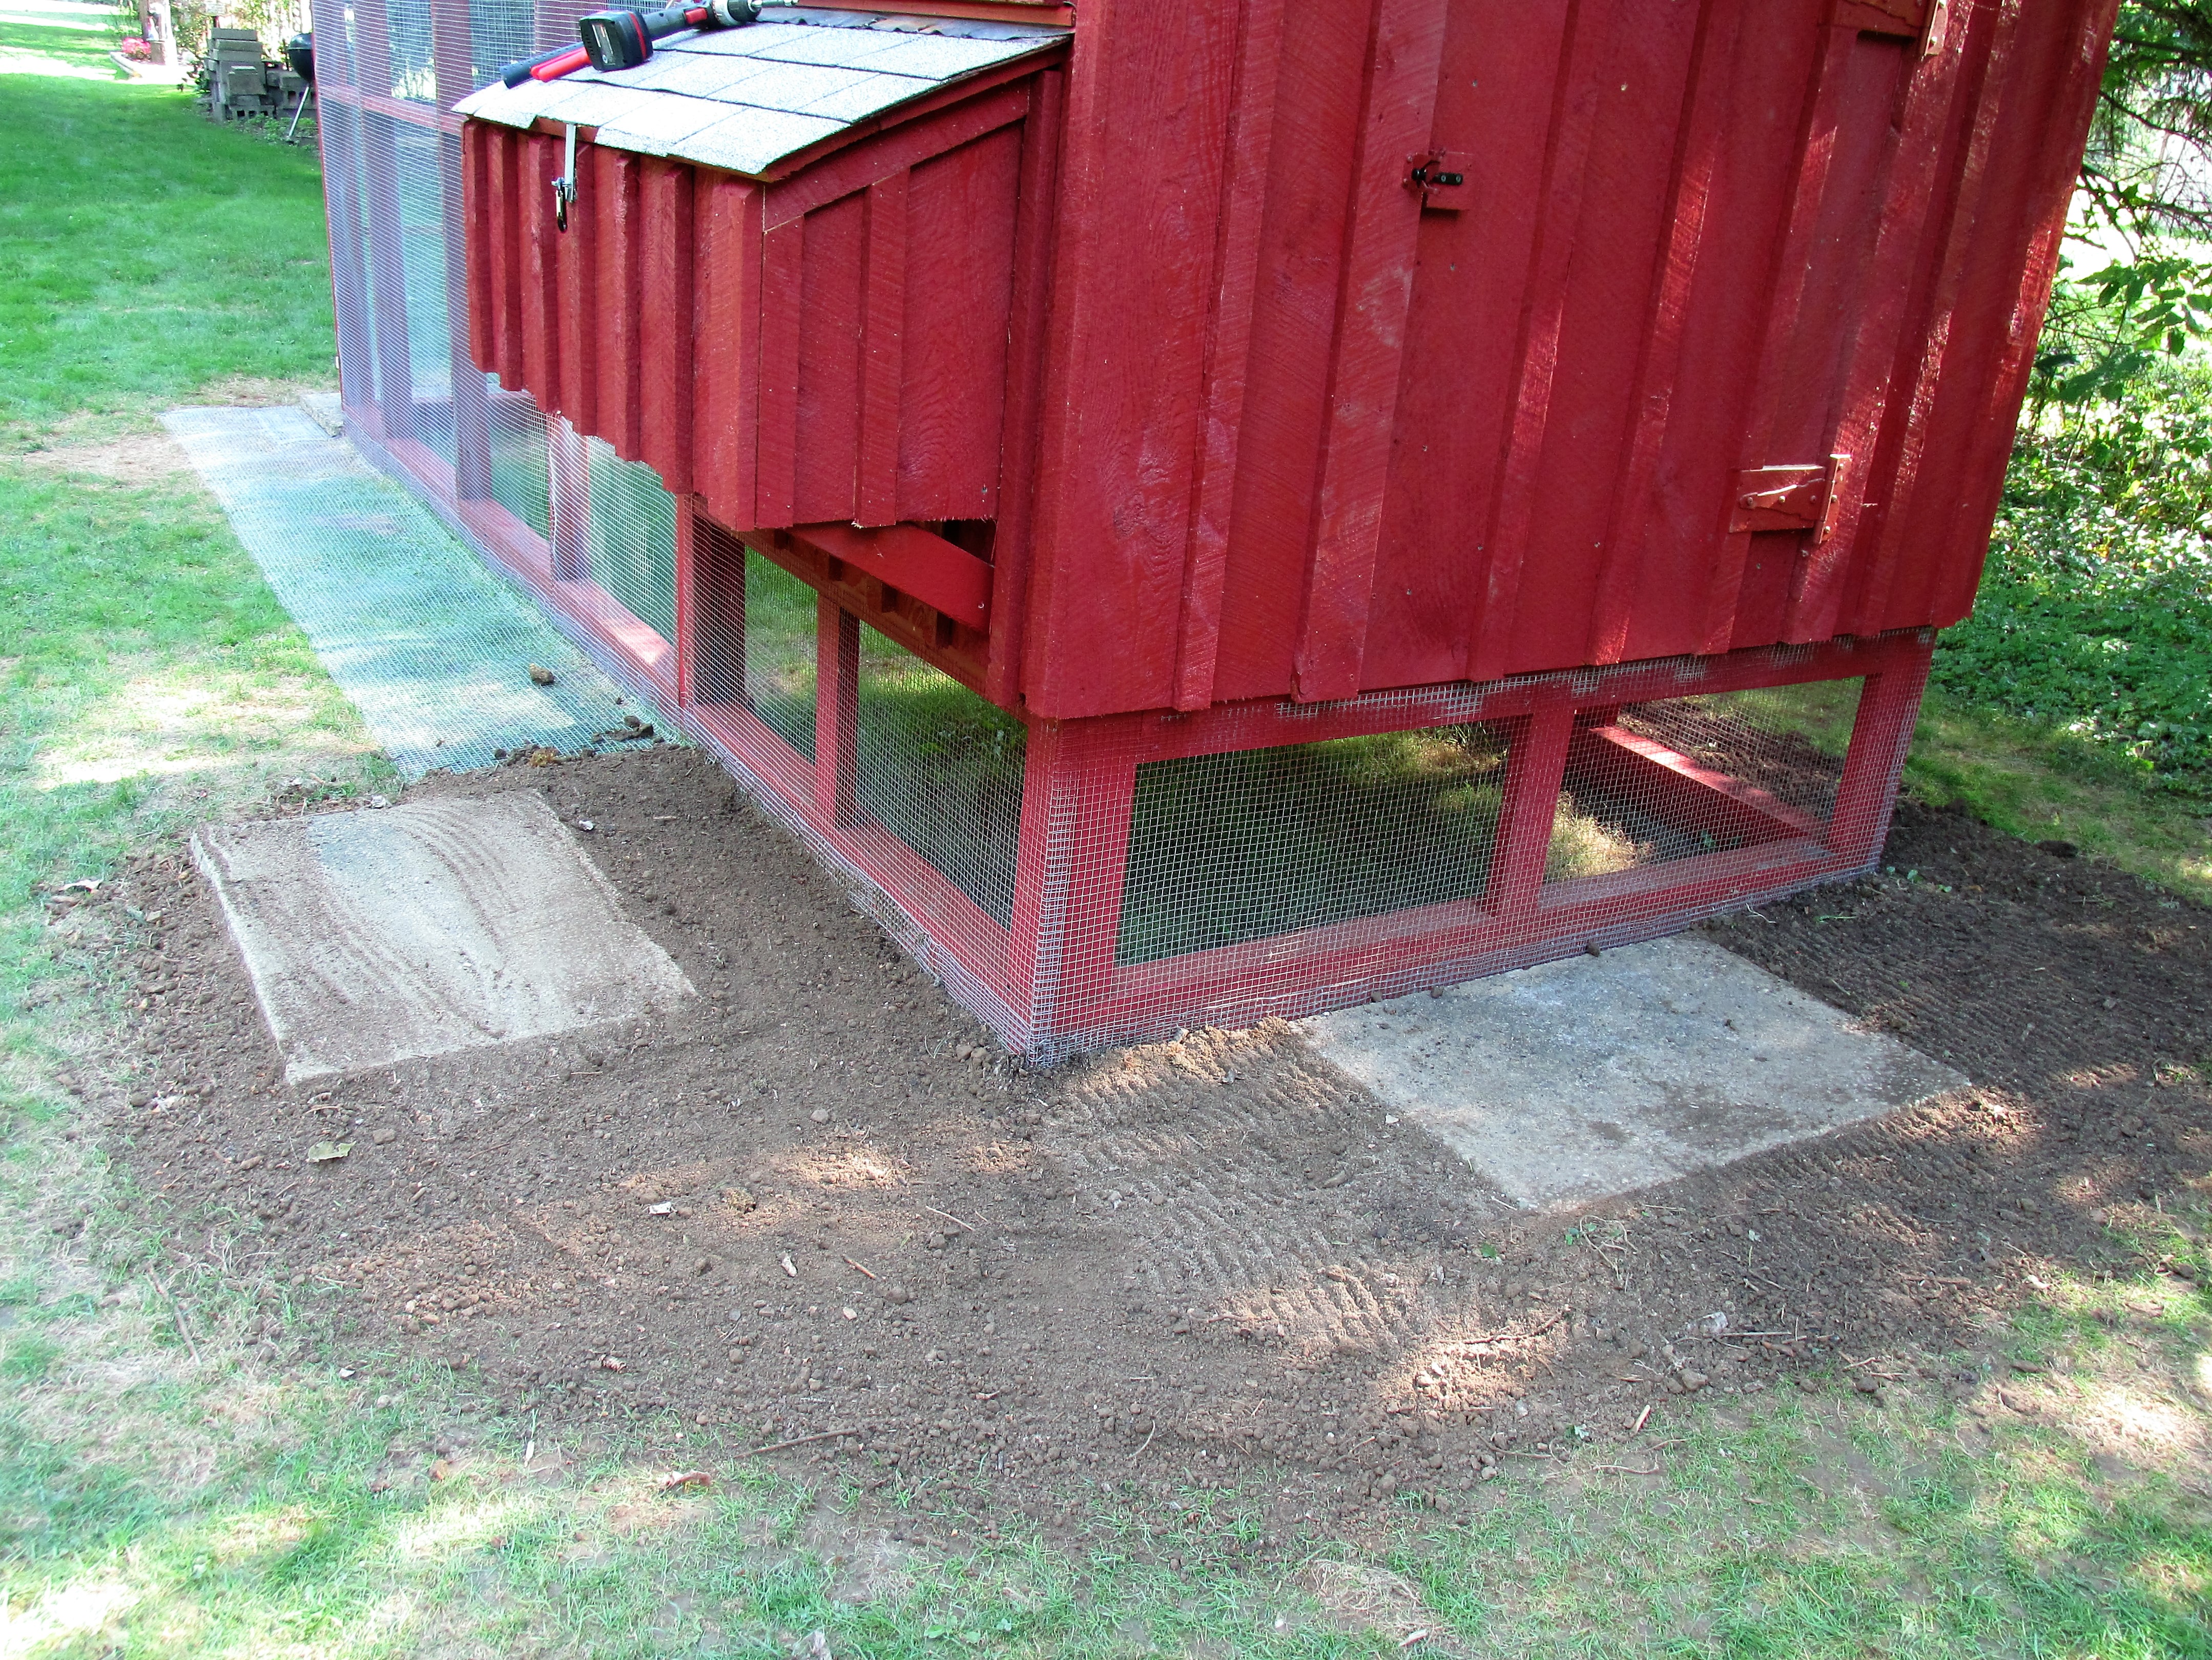 apron started covering it with dirt, and installed  cement slabs in front of doors and nesting box